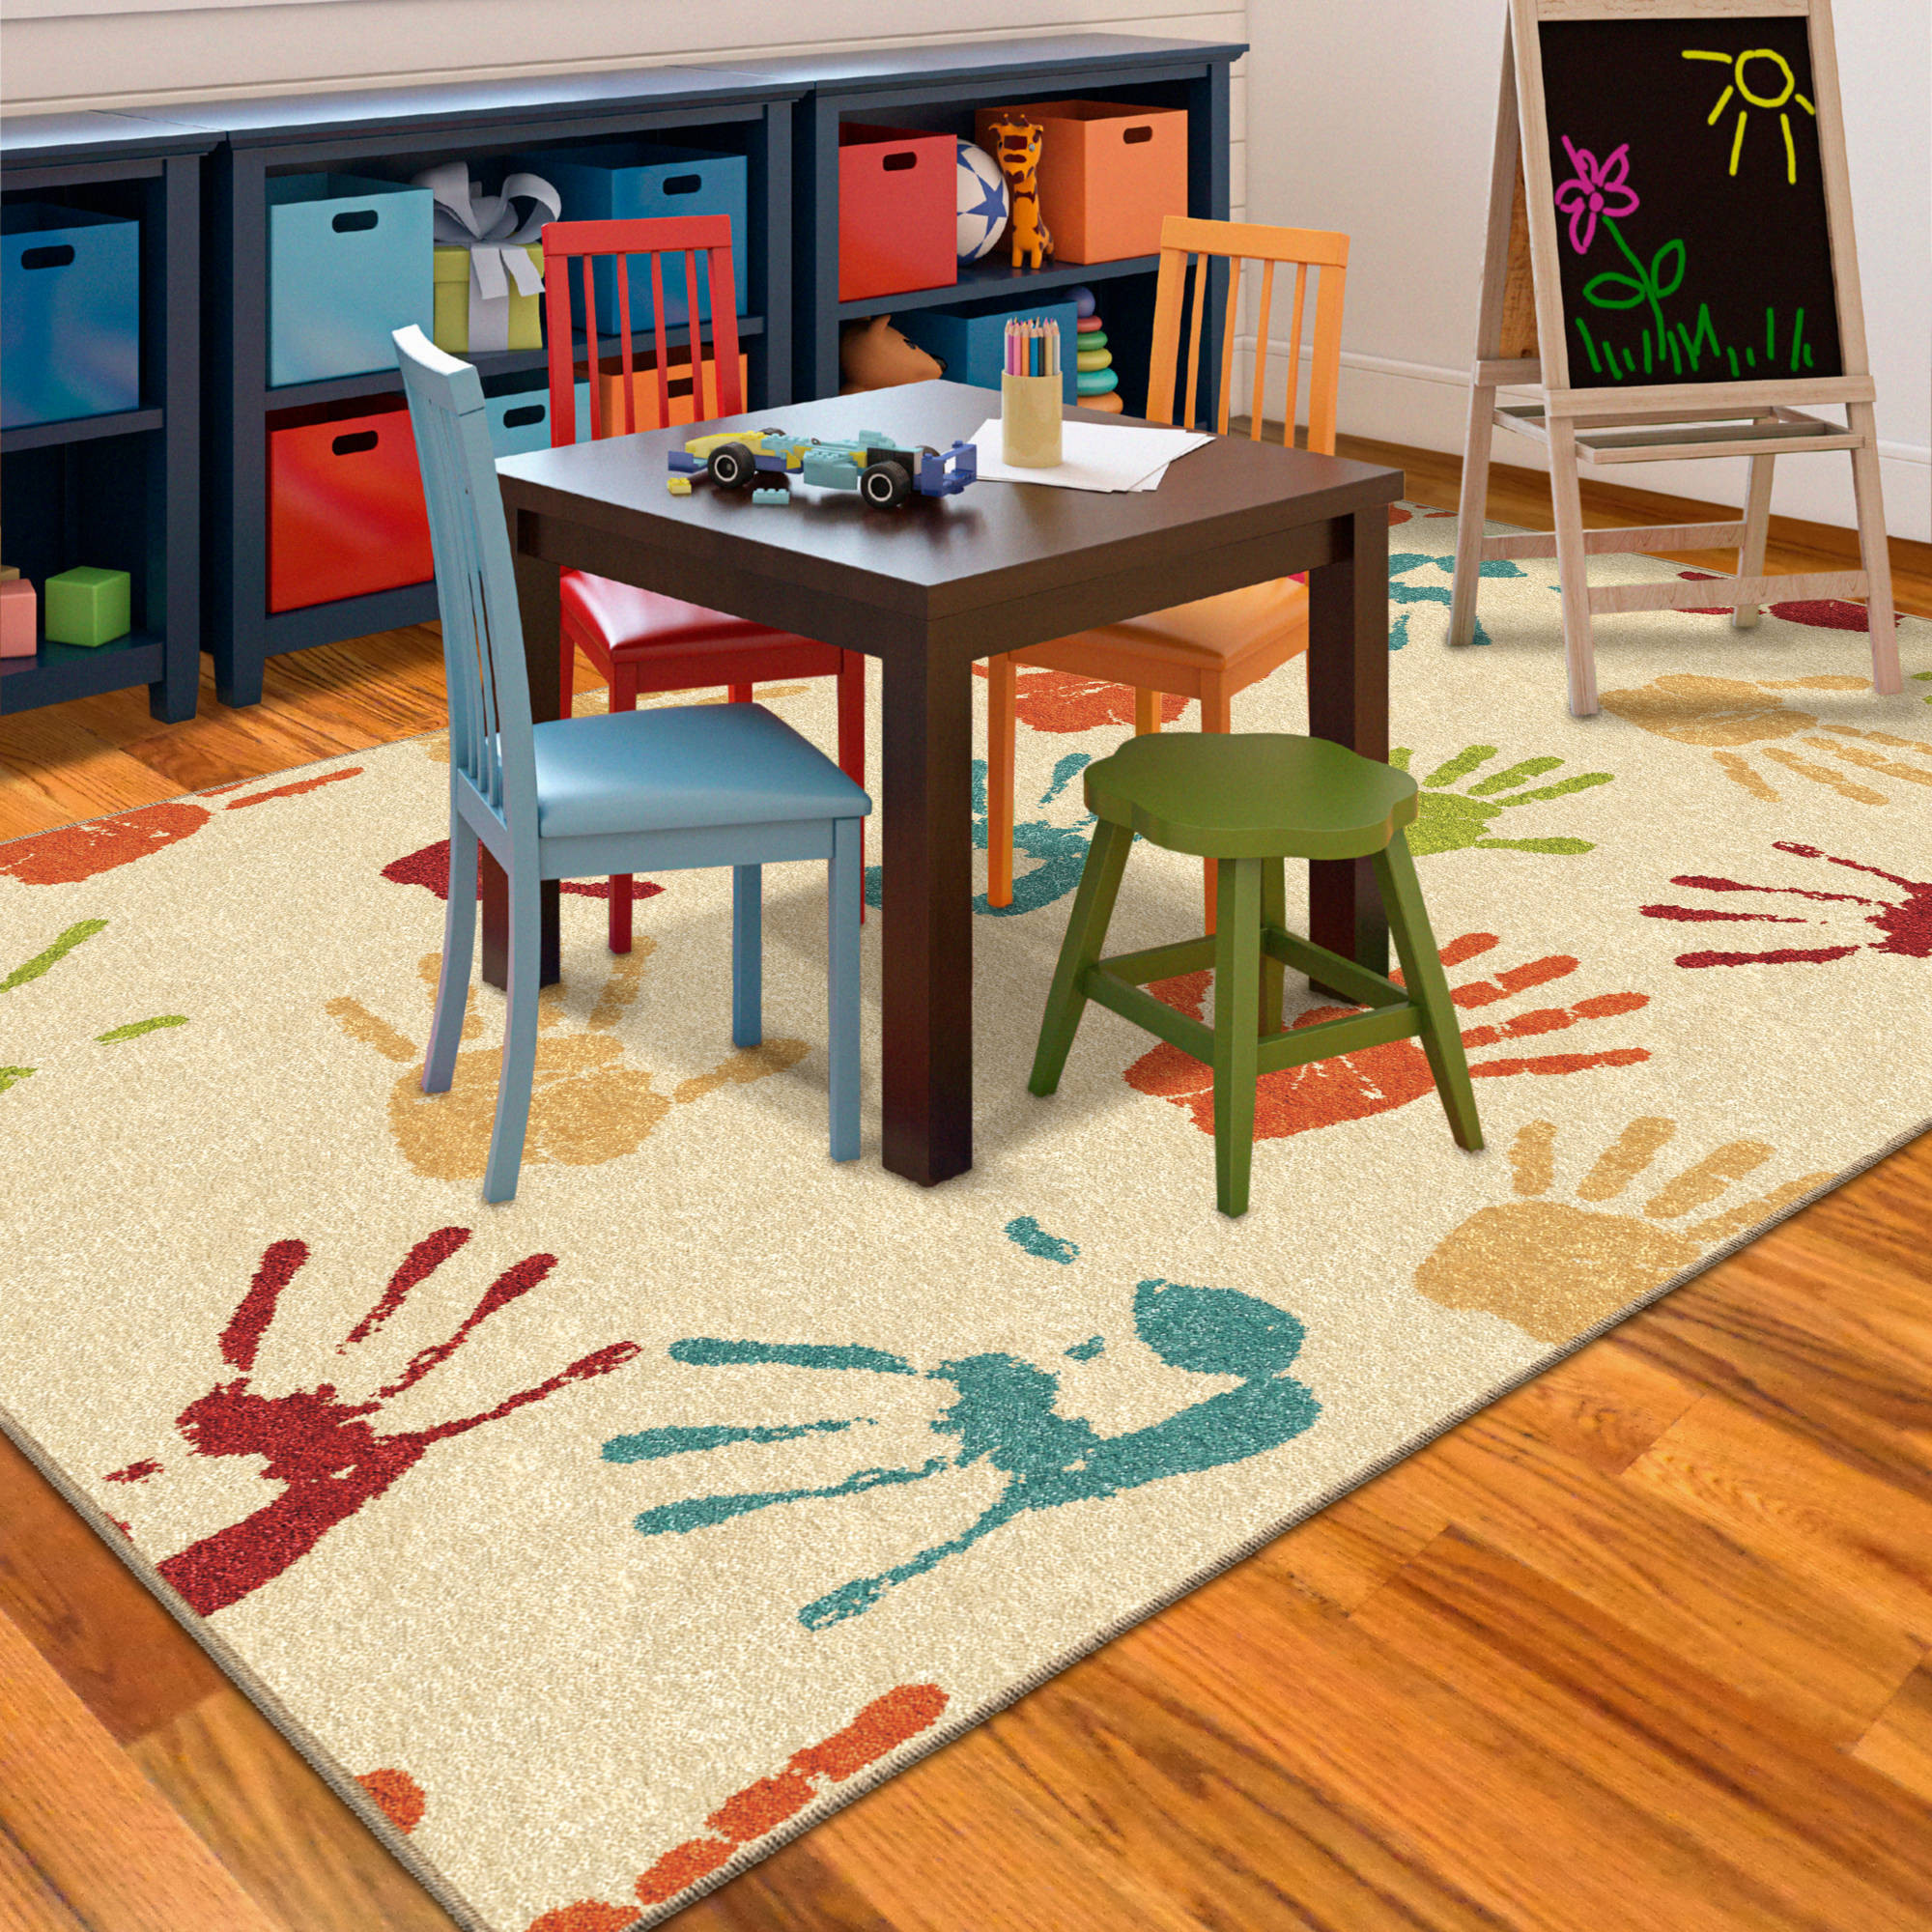 Kids Room Mats
 5 Things to Think About When Choosing Kids Playroom Rugs